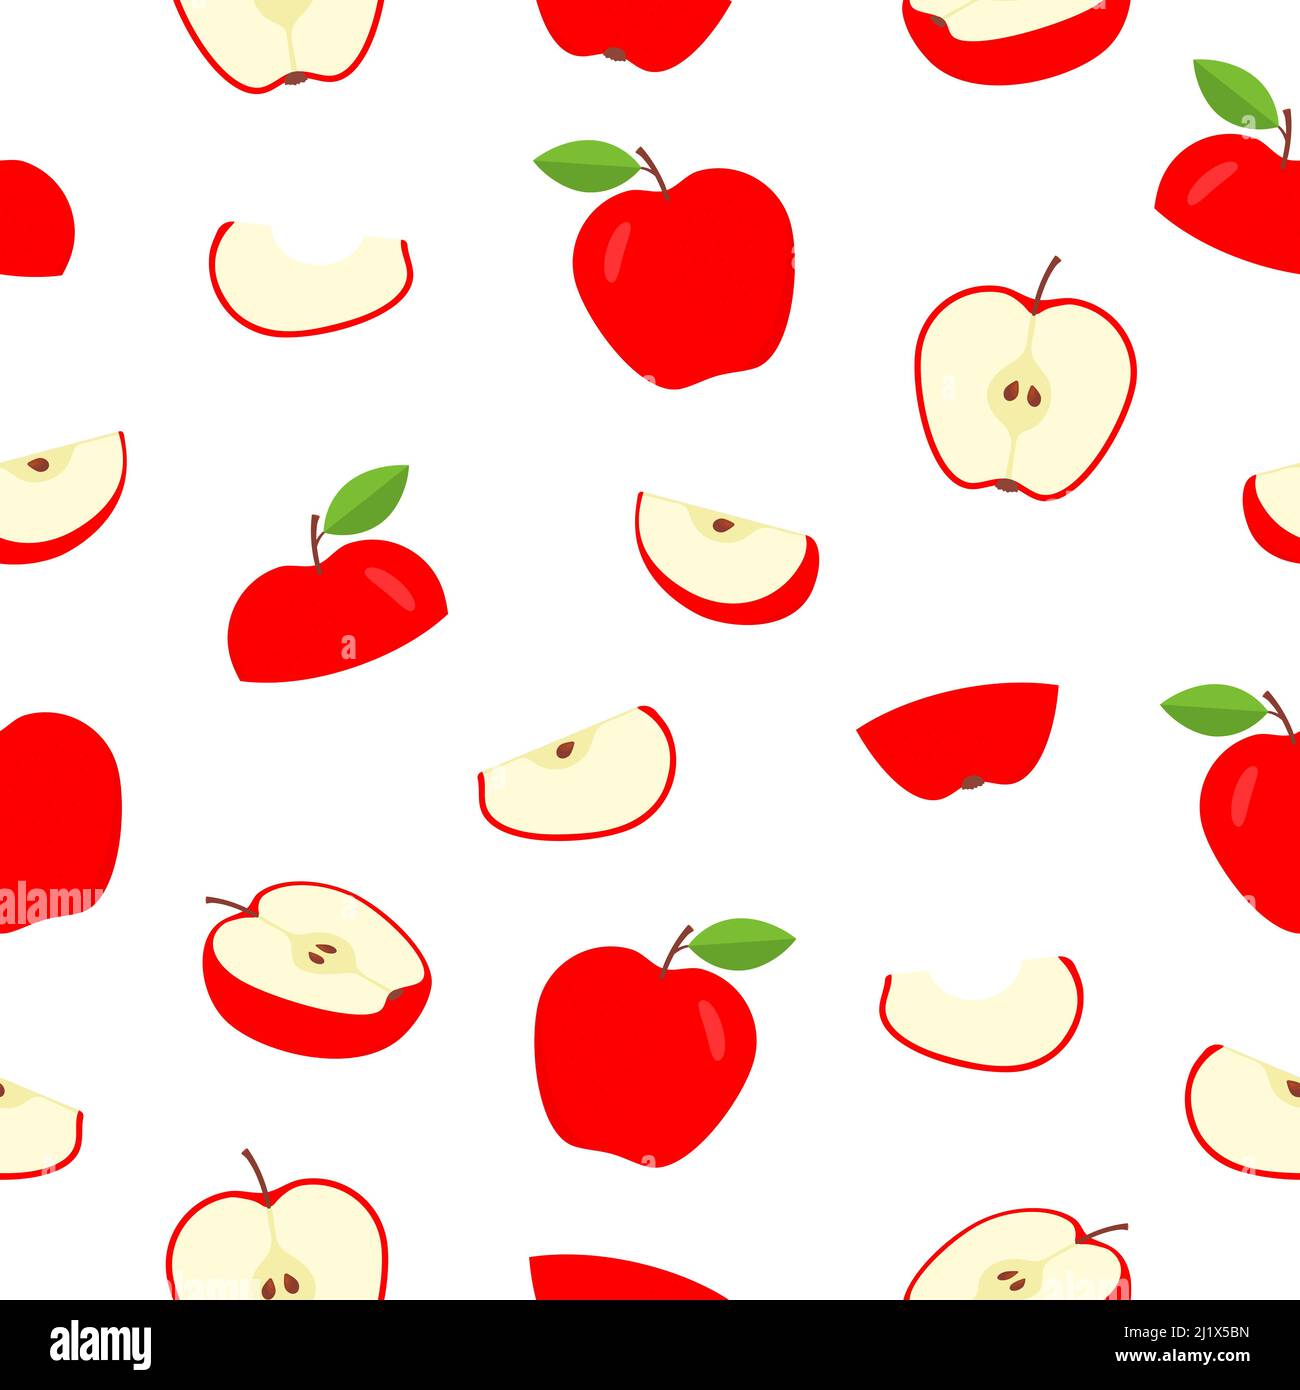 Seamless apple pattern. Sliced red apples white background. Sweet cute texture. Vector illustration. Stock Vector